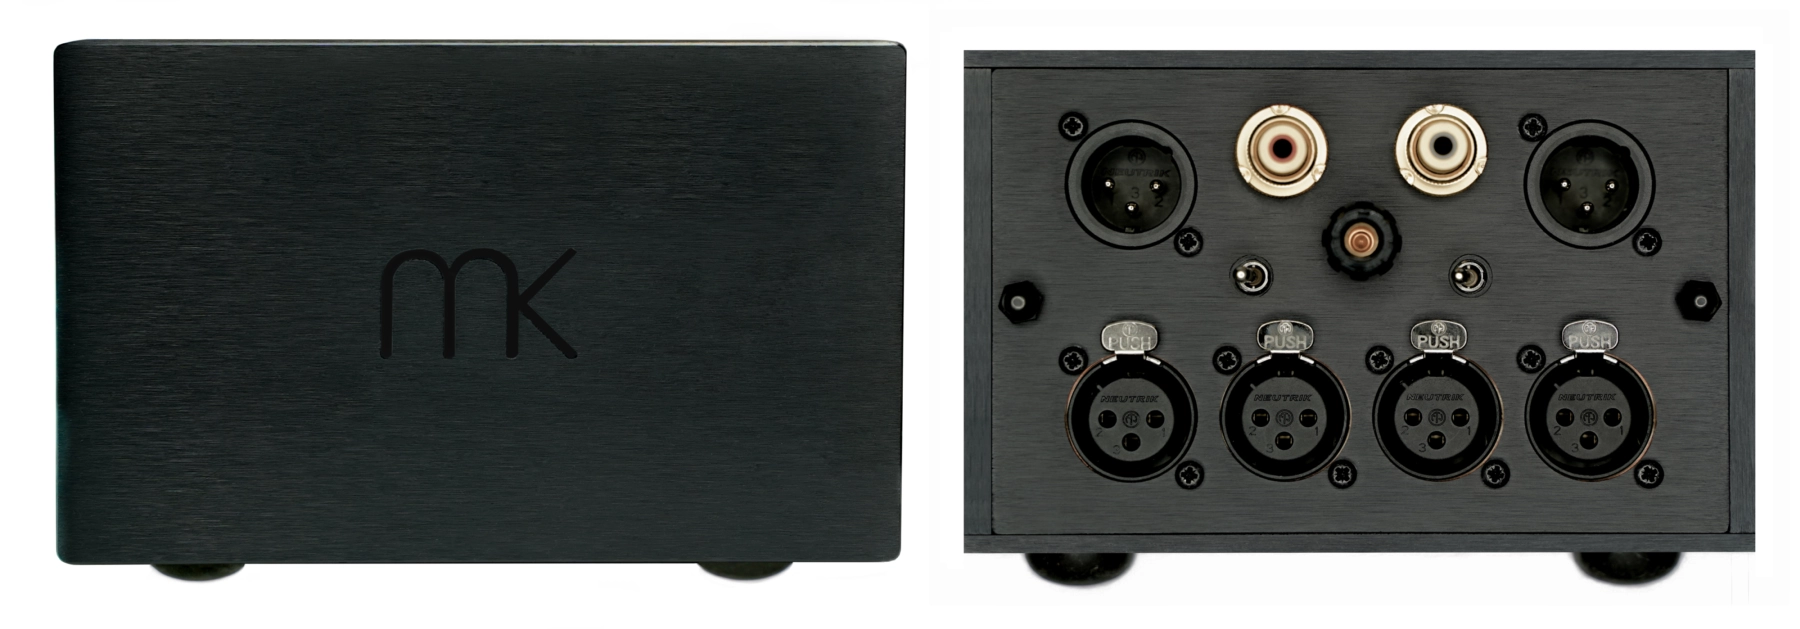 MK Analogue Step-up Transformer SUT-1M – front and back